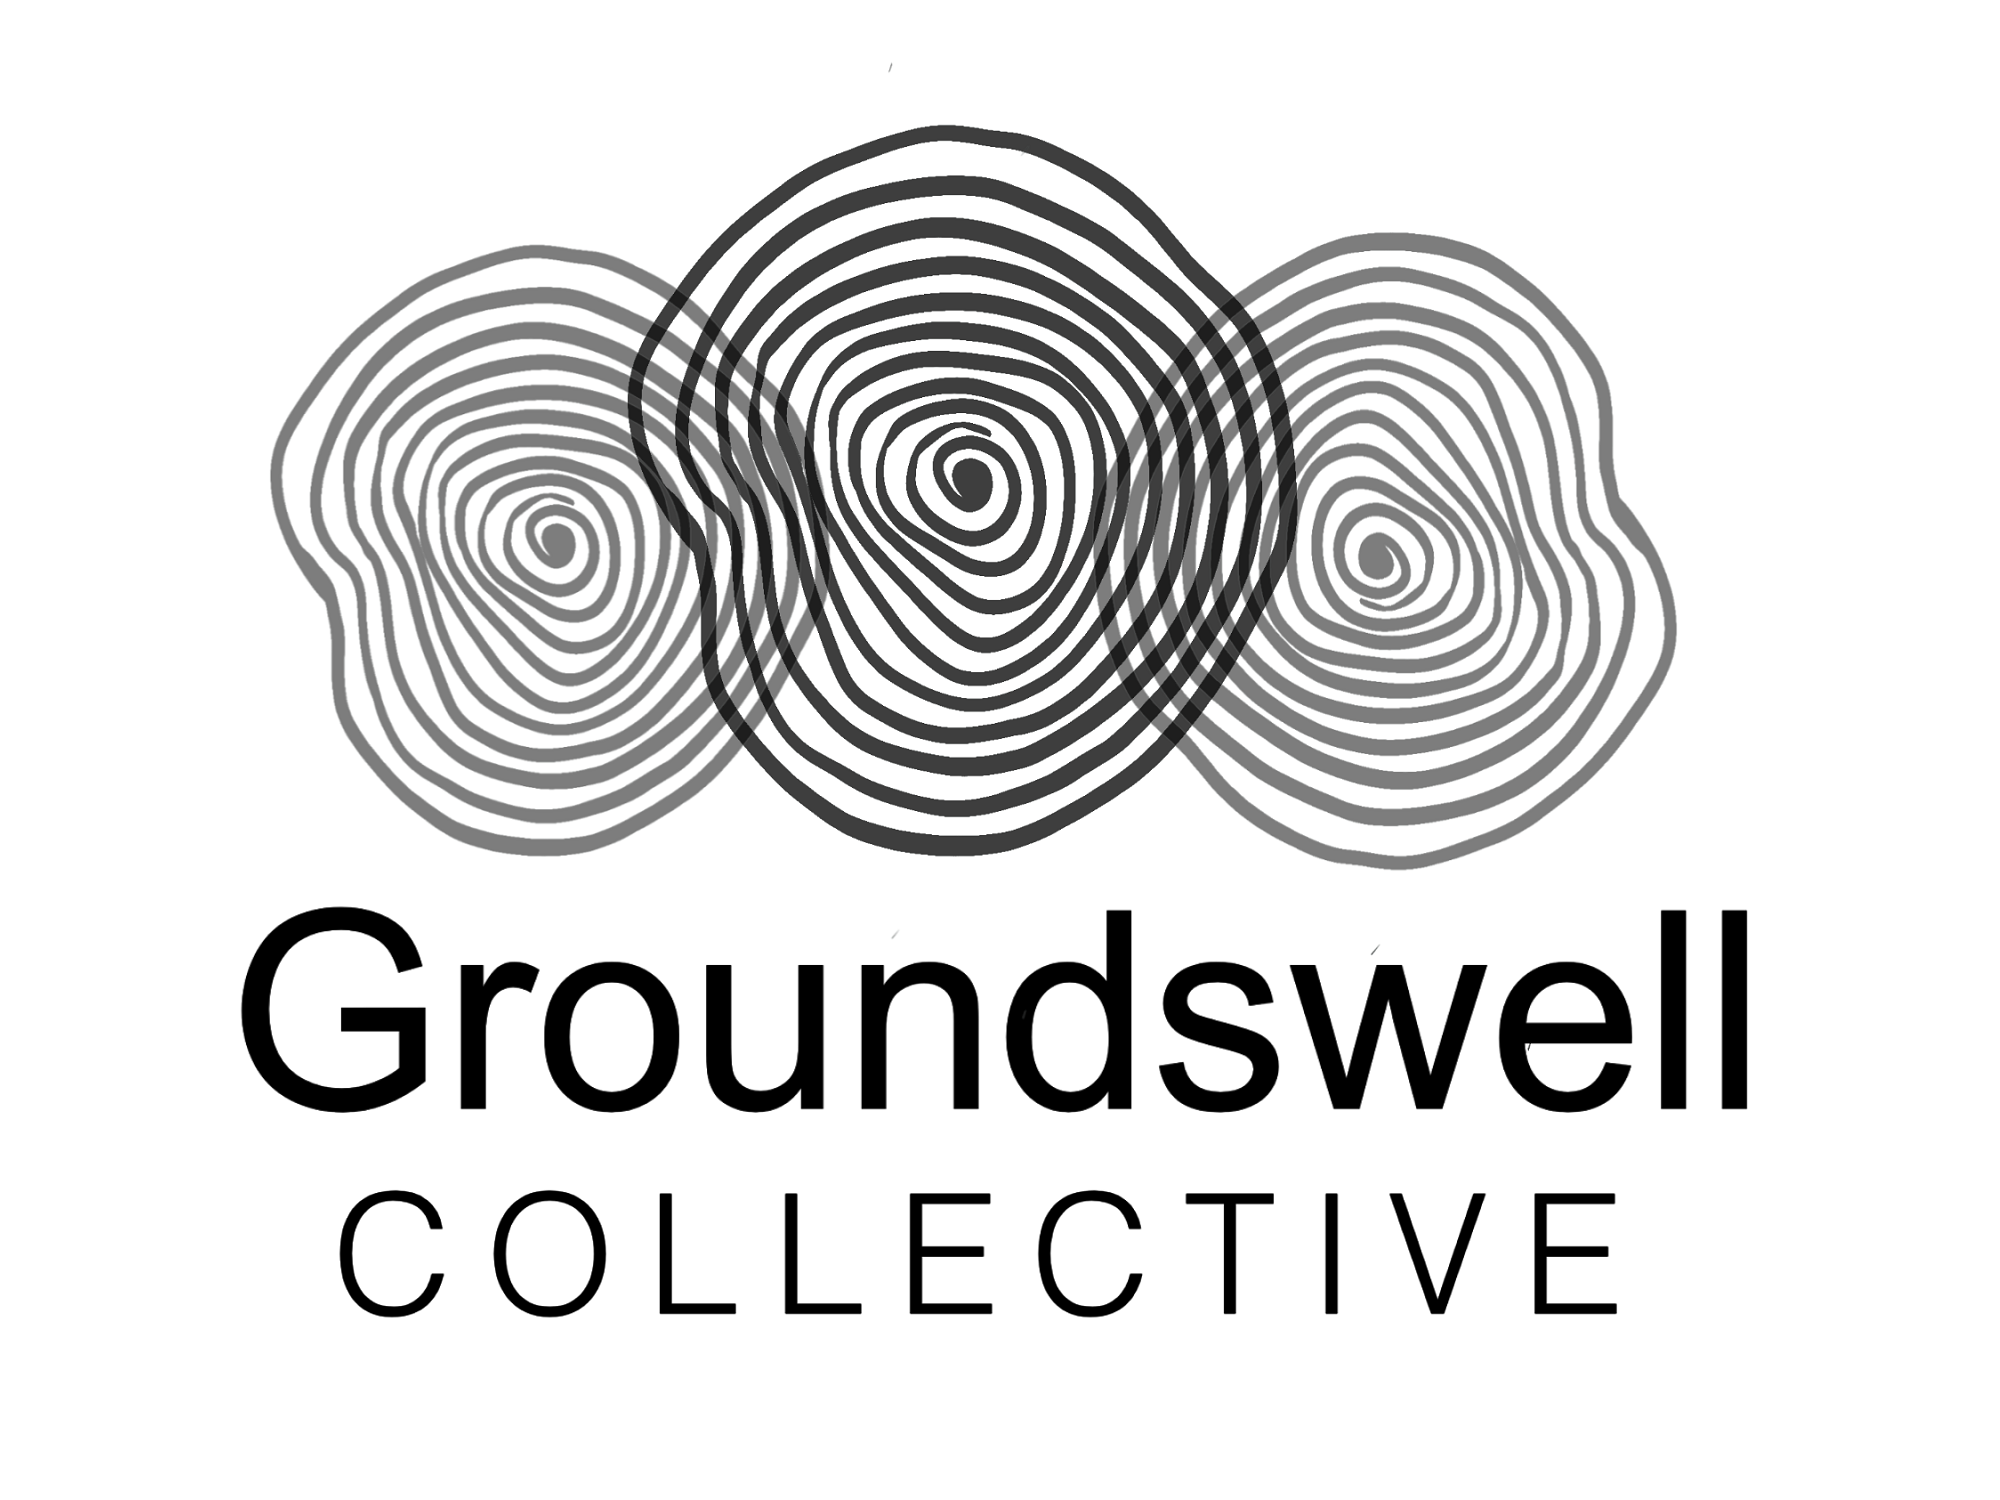 The Groundswell Collective